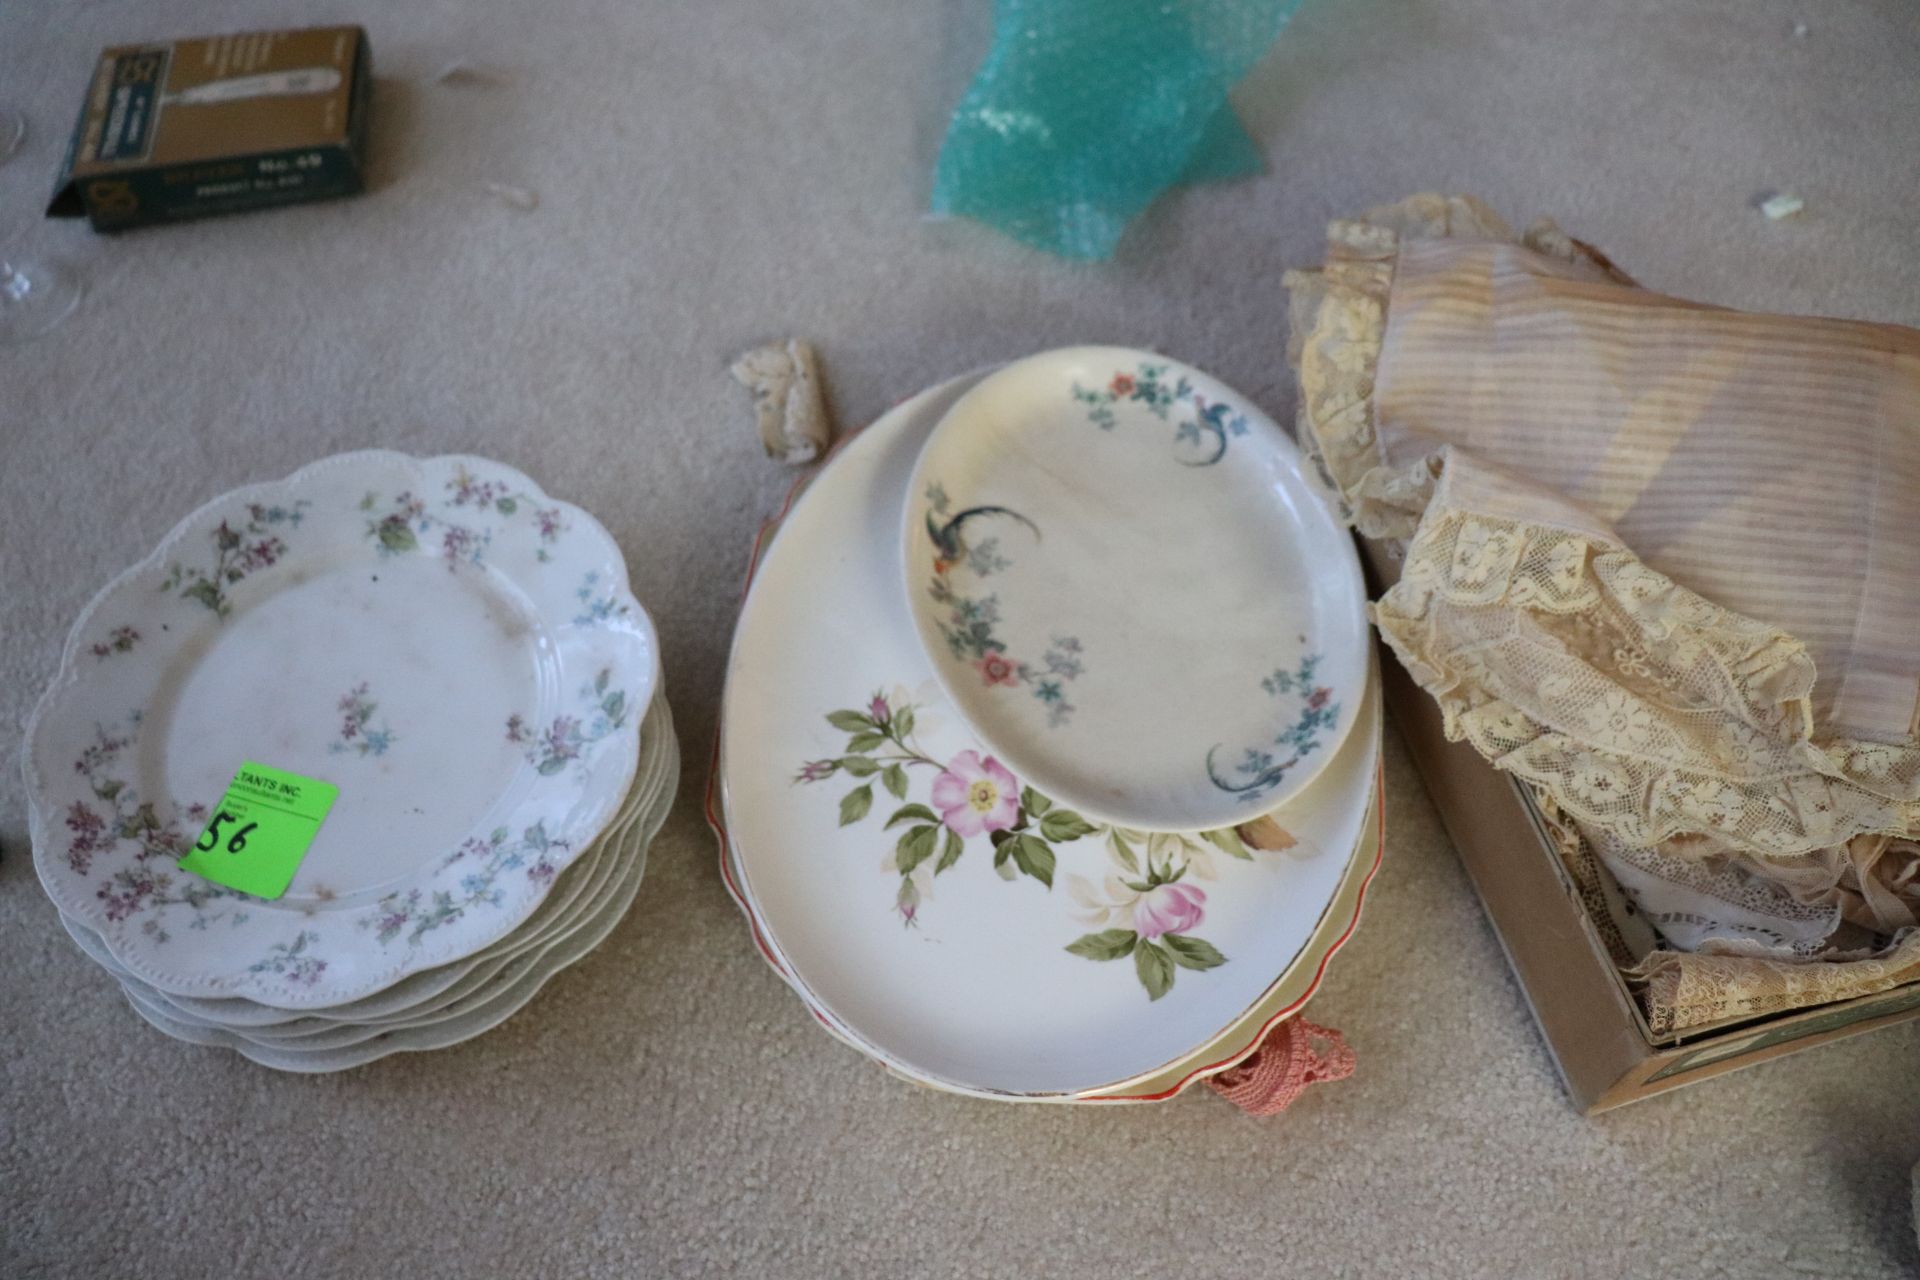 Porcelain plates and platters, and a box of doilies